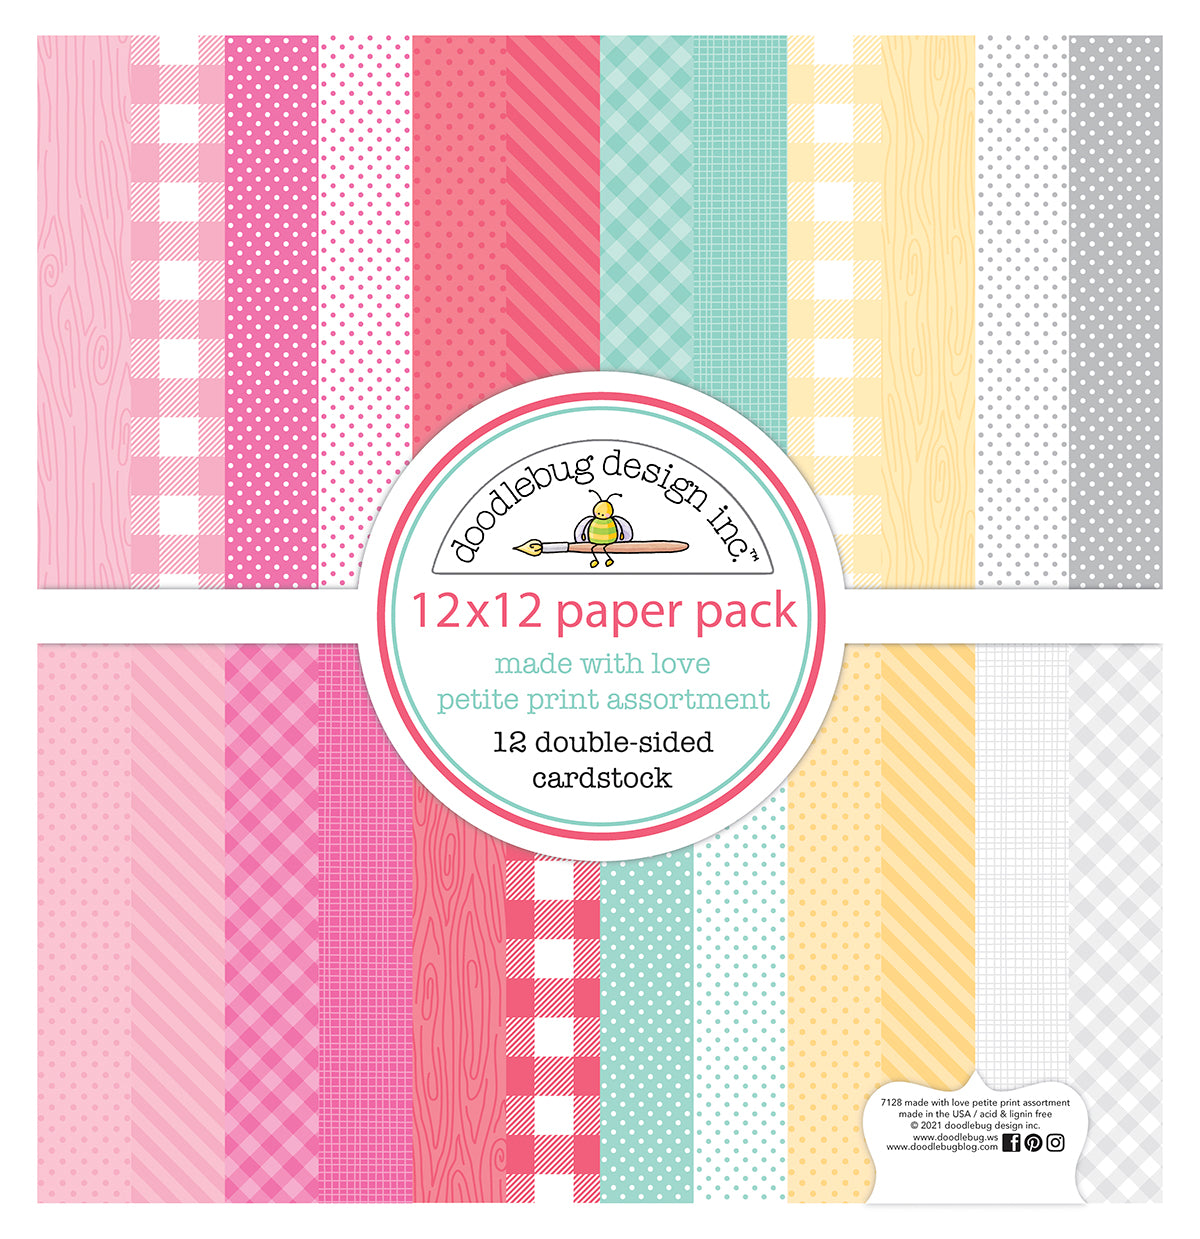 Doodlebug Designs Made with Love Petite Prints Paper Pack